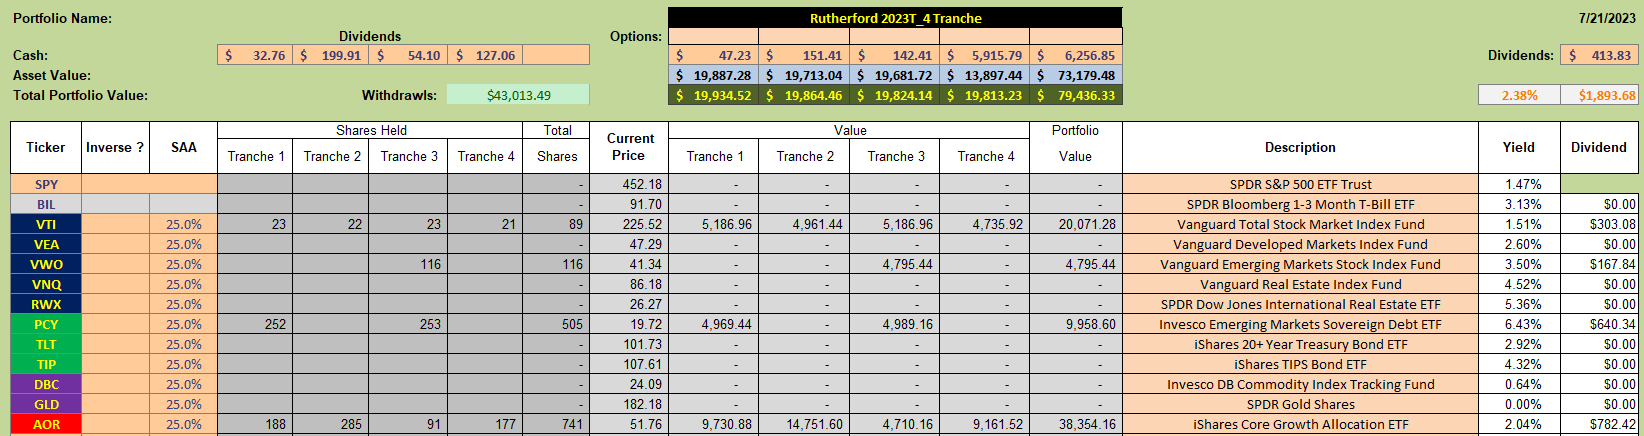 Rutherford Portfolio Review (Tranche 4): 21 July 2023 4